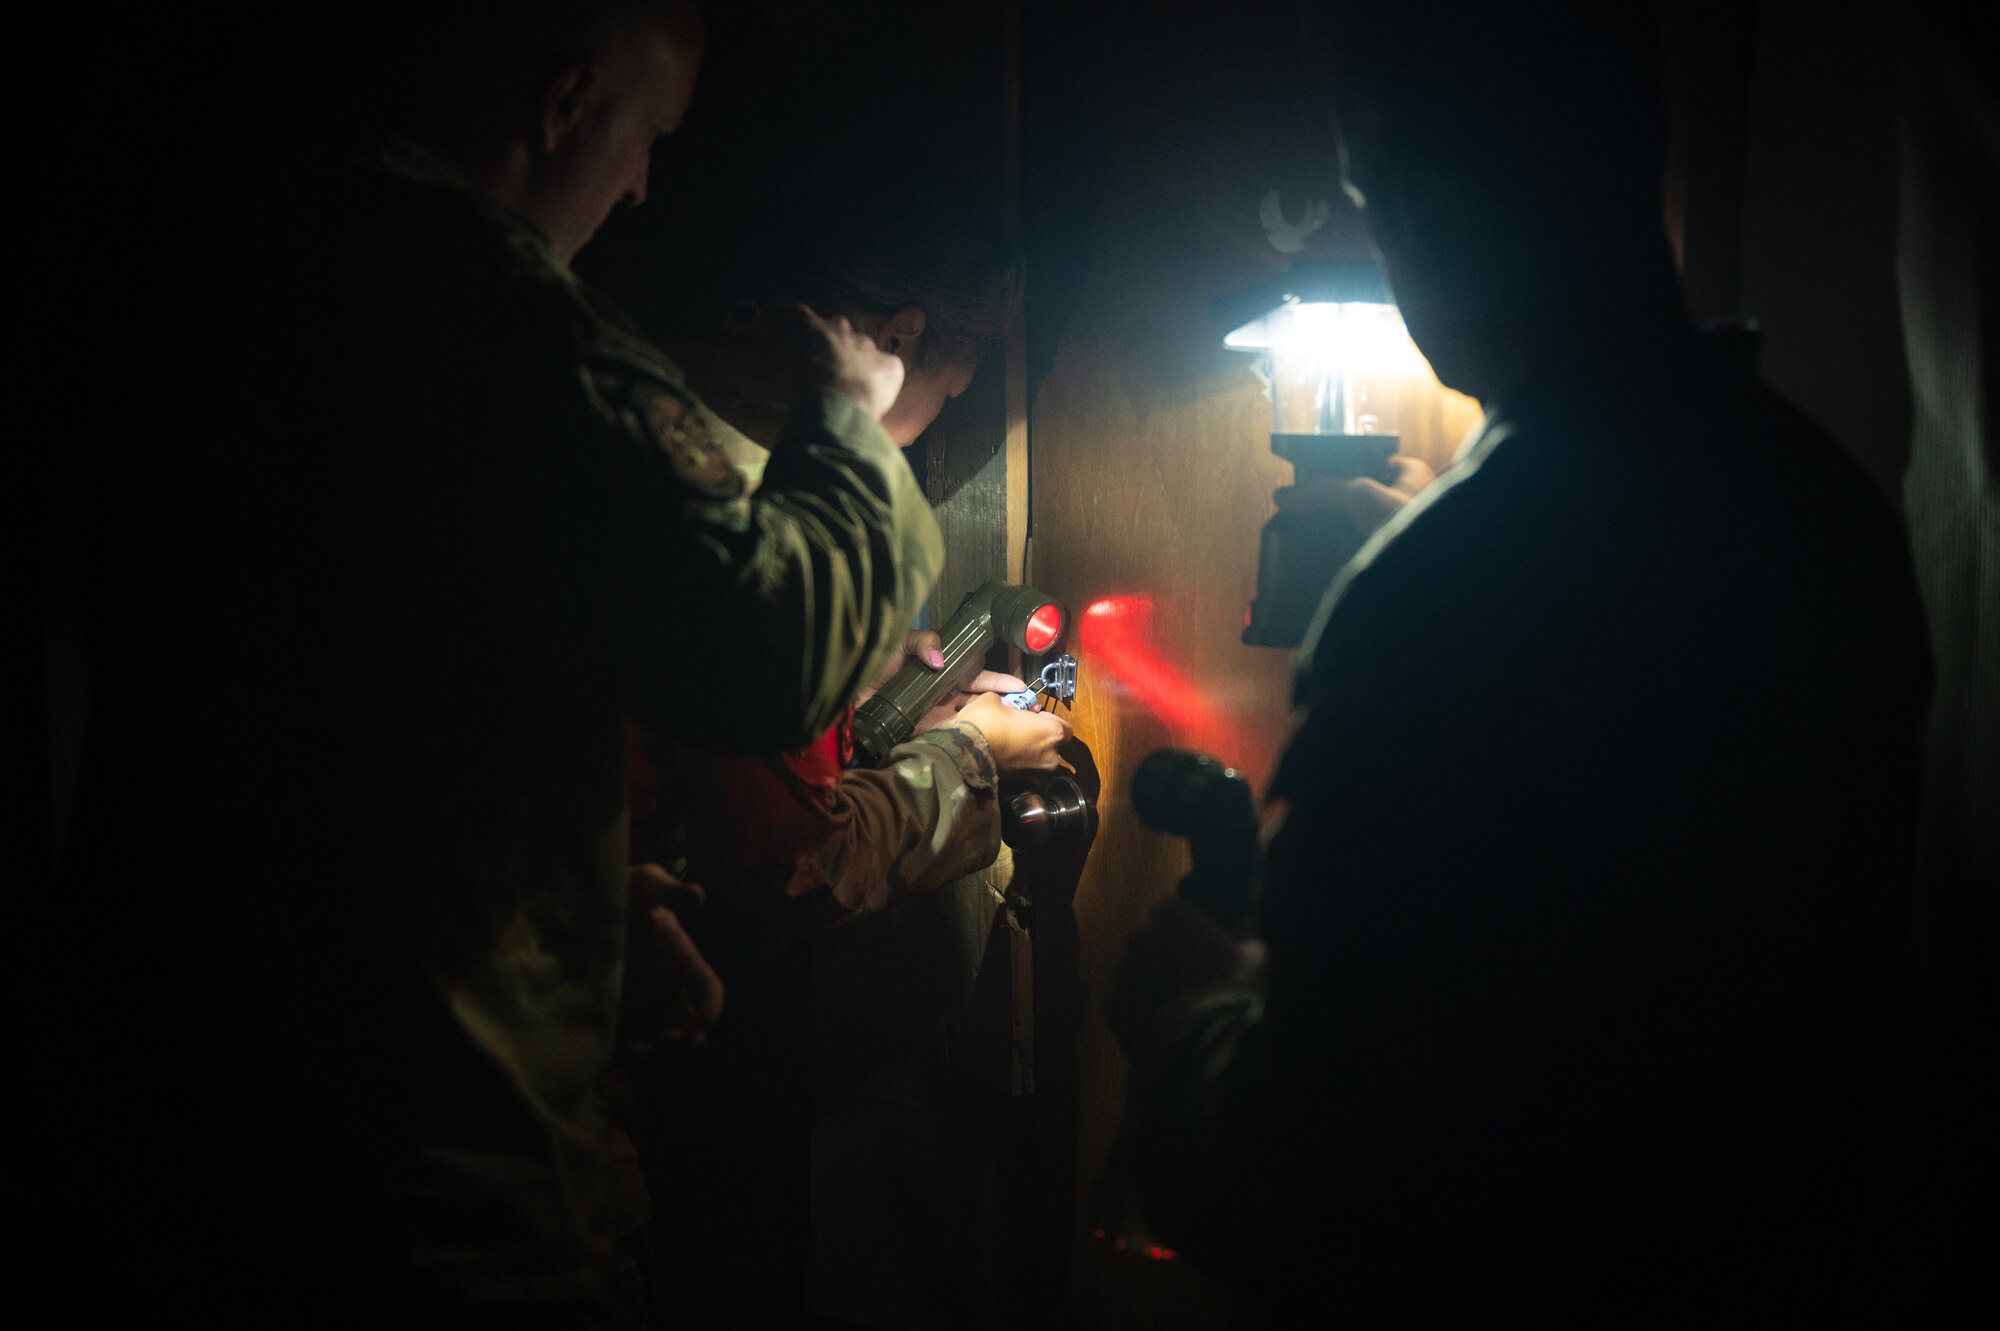 U.S. Air Force Airmen work together to unlock a padlocked door during a fire escape room exercise as part of fire safety awareness week Oct. 12, 2022 at Al Udeid Air Base, Qatar. These Airmen had to work together to find clues, unlock padlocks and perform a rescue as part of an exercise to impress upon people the importance and challenge of fire safety awareness.